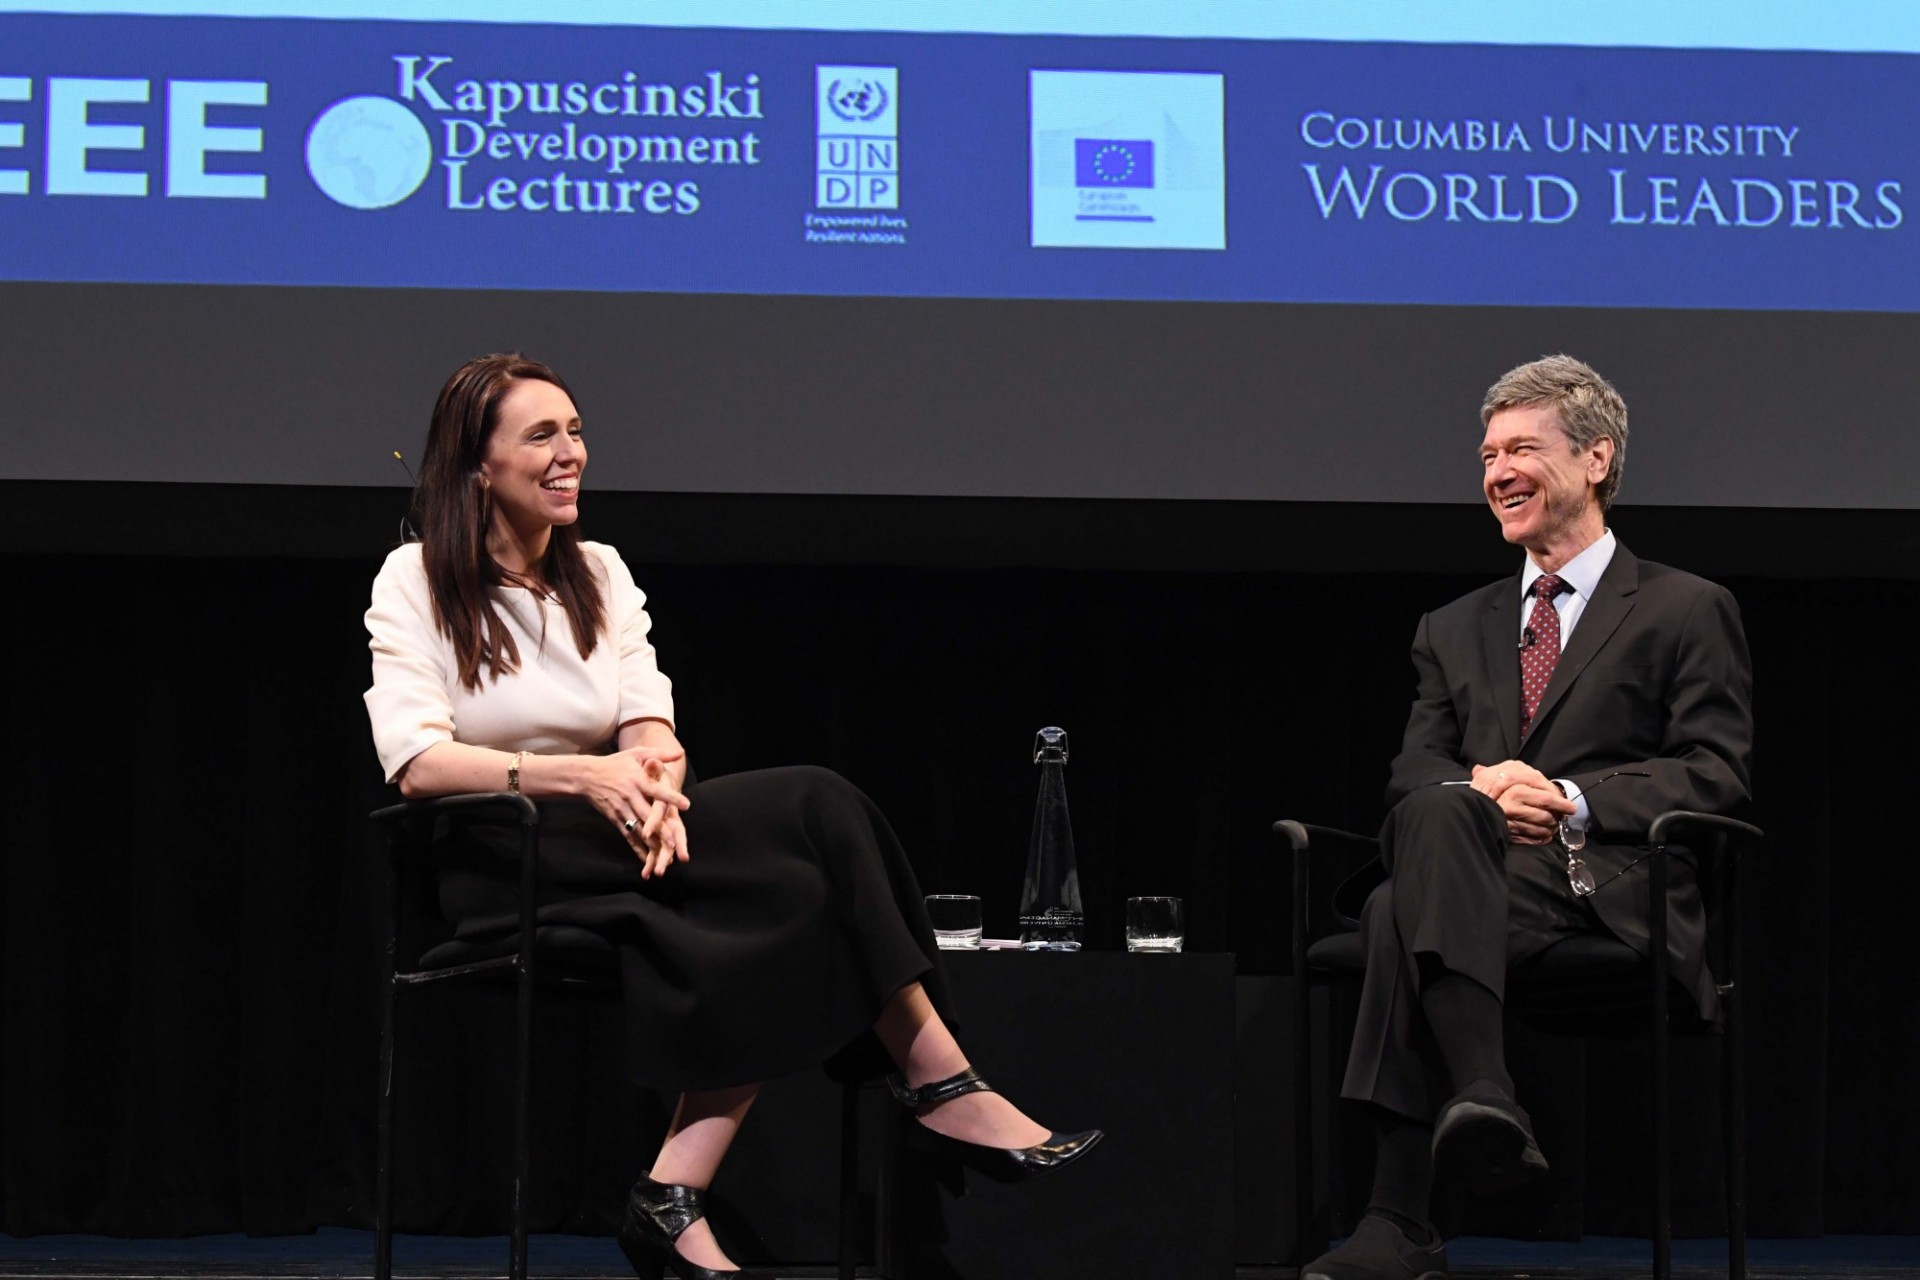 Jeffrey Sachs,Director, Center for Sustainable Development in the Earth Institute, moderates the question and answer session with the audience.